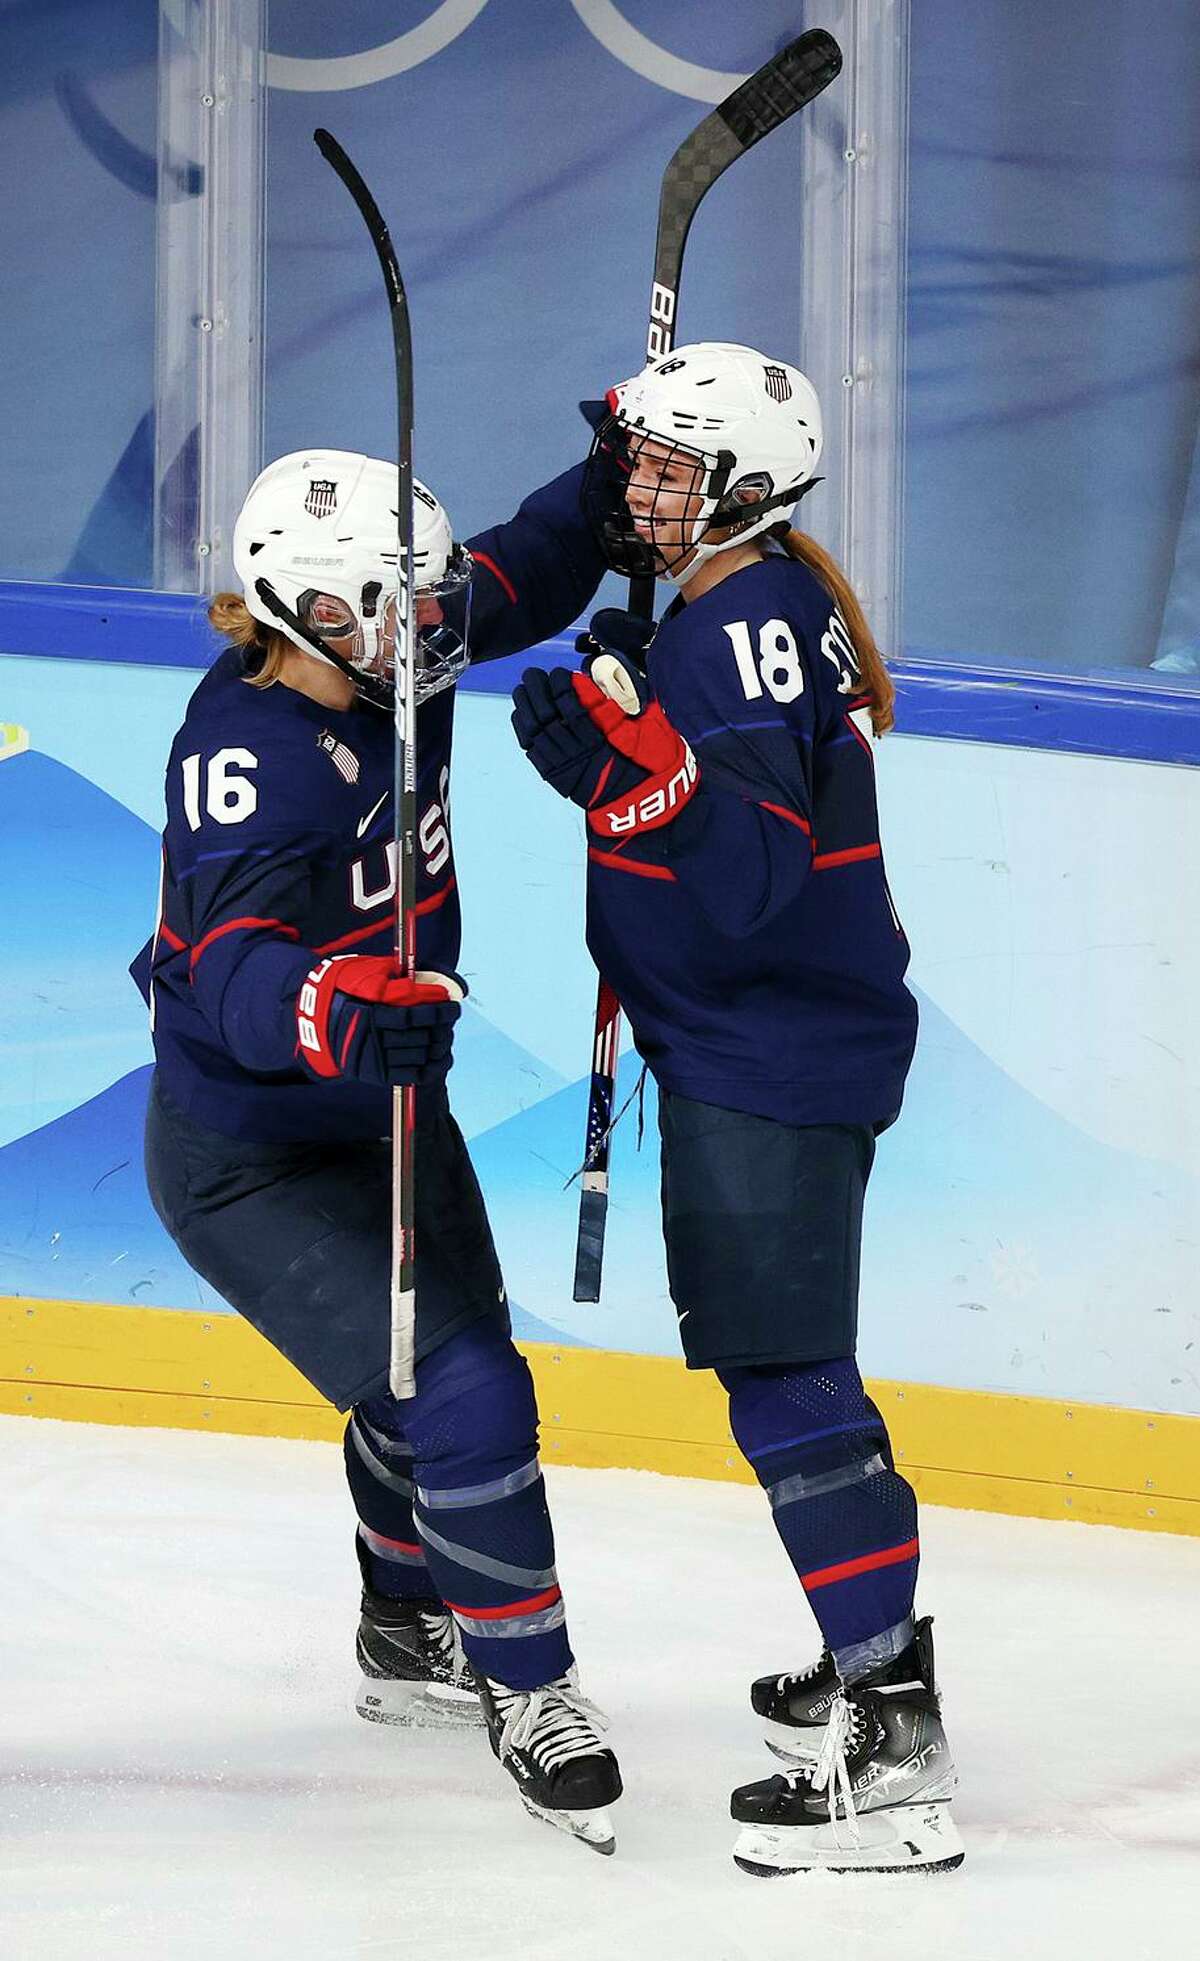 U.S. forward Jesse Compher (18) celebrates her goal with forward Hayley Scamurra (16) in the third period.